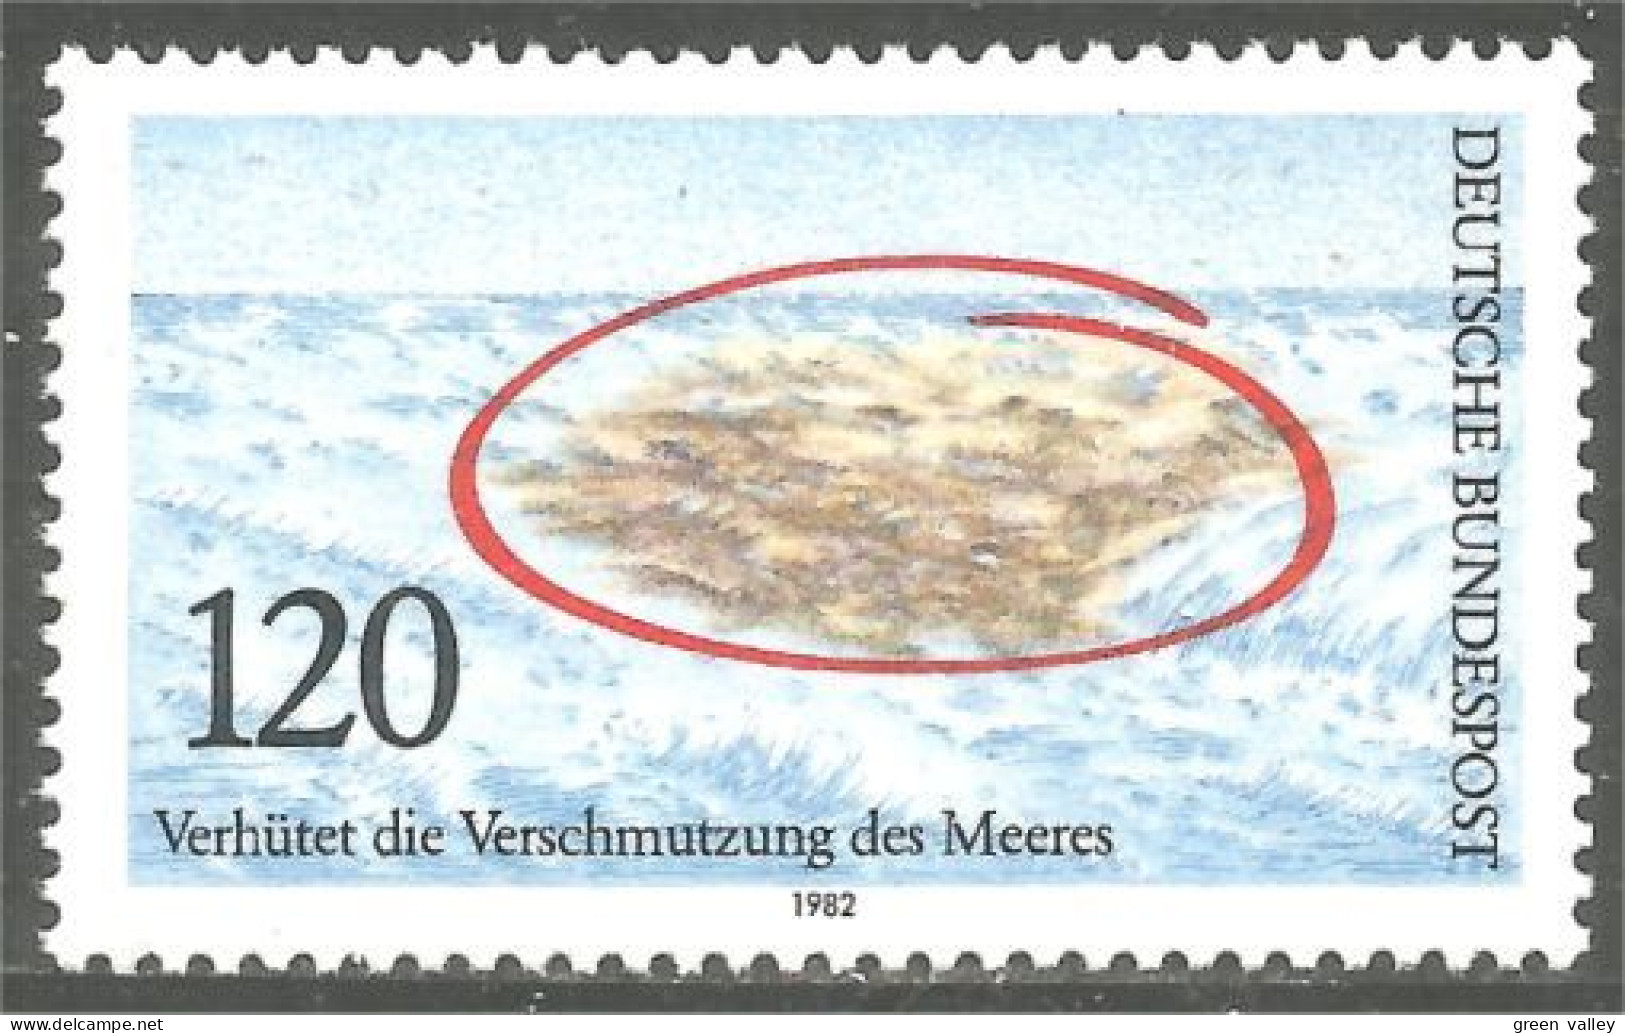 446 Germany Water Pollution Eau MNH ** Neuf SC (GEF-307) - Inquinamento